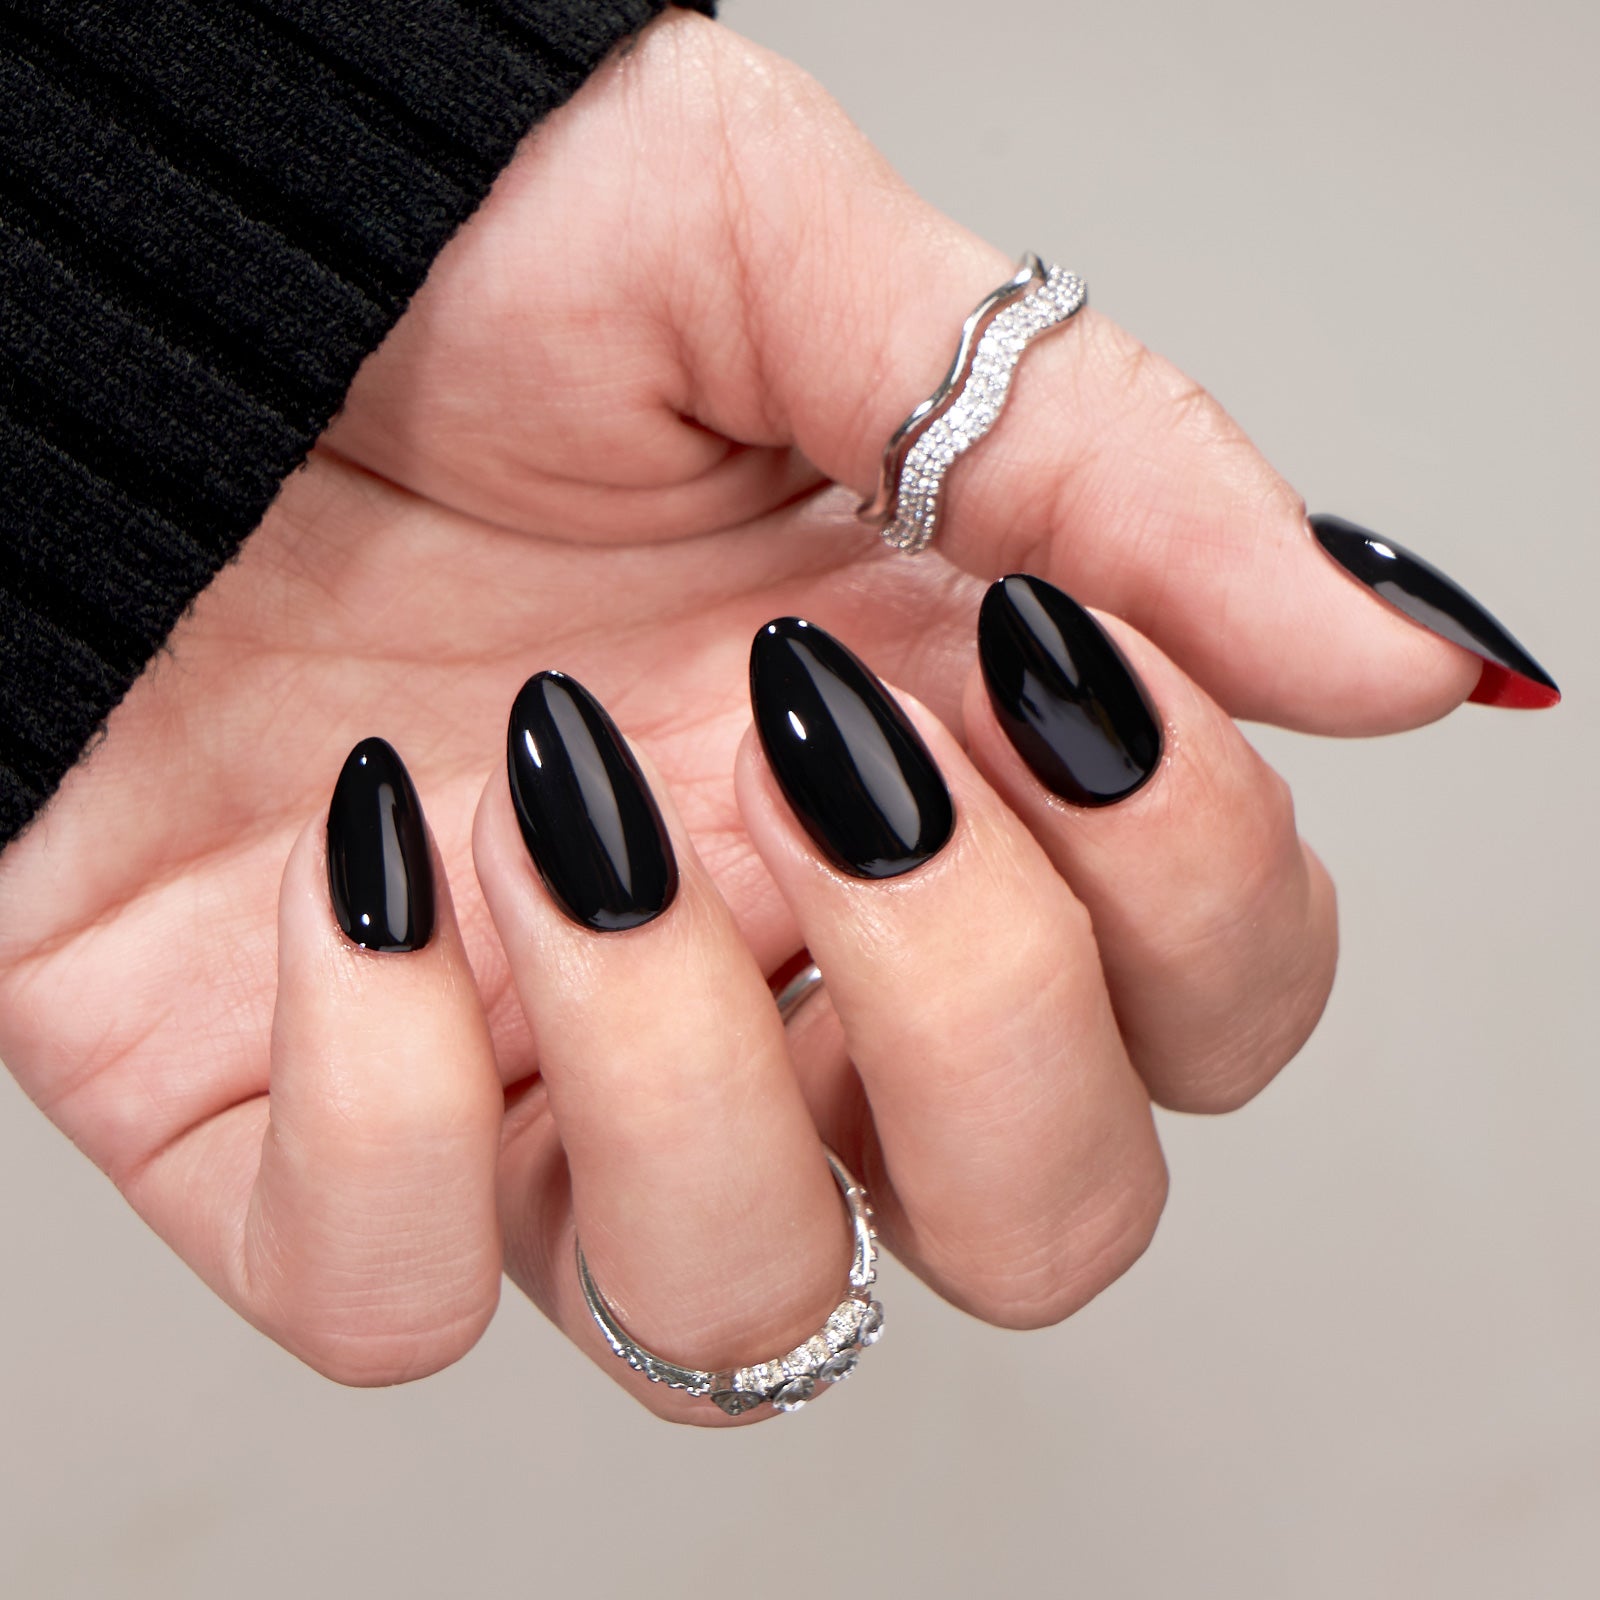 Ongles noirs vernis